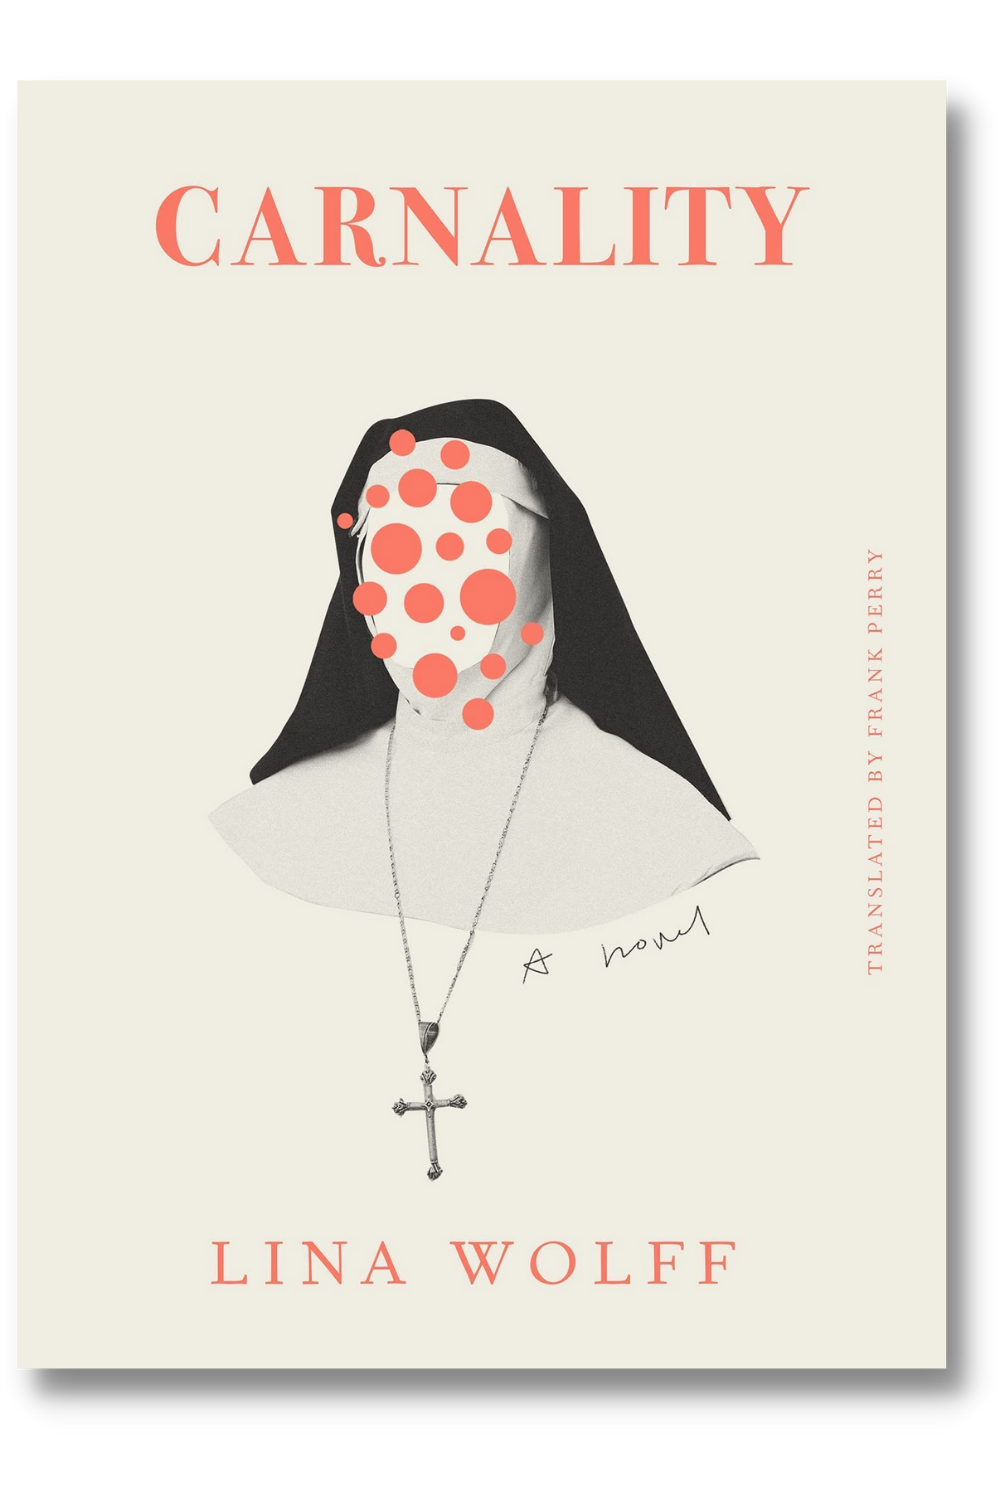 The cover of "Carnality" by Lina Wolff, tr. Frank Perry